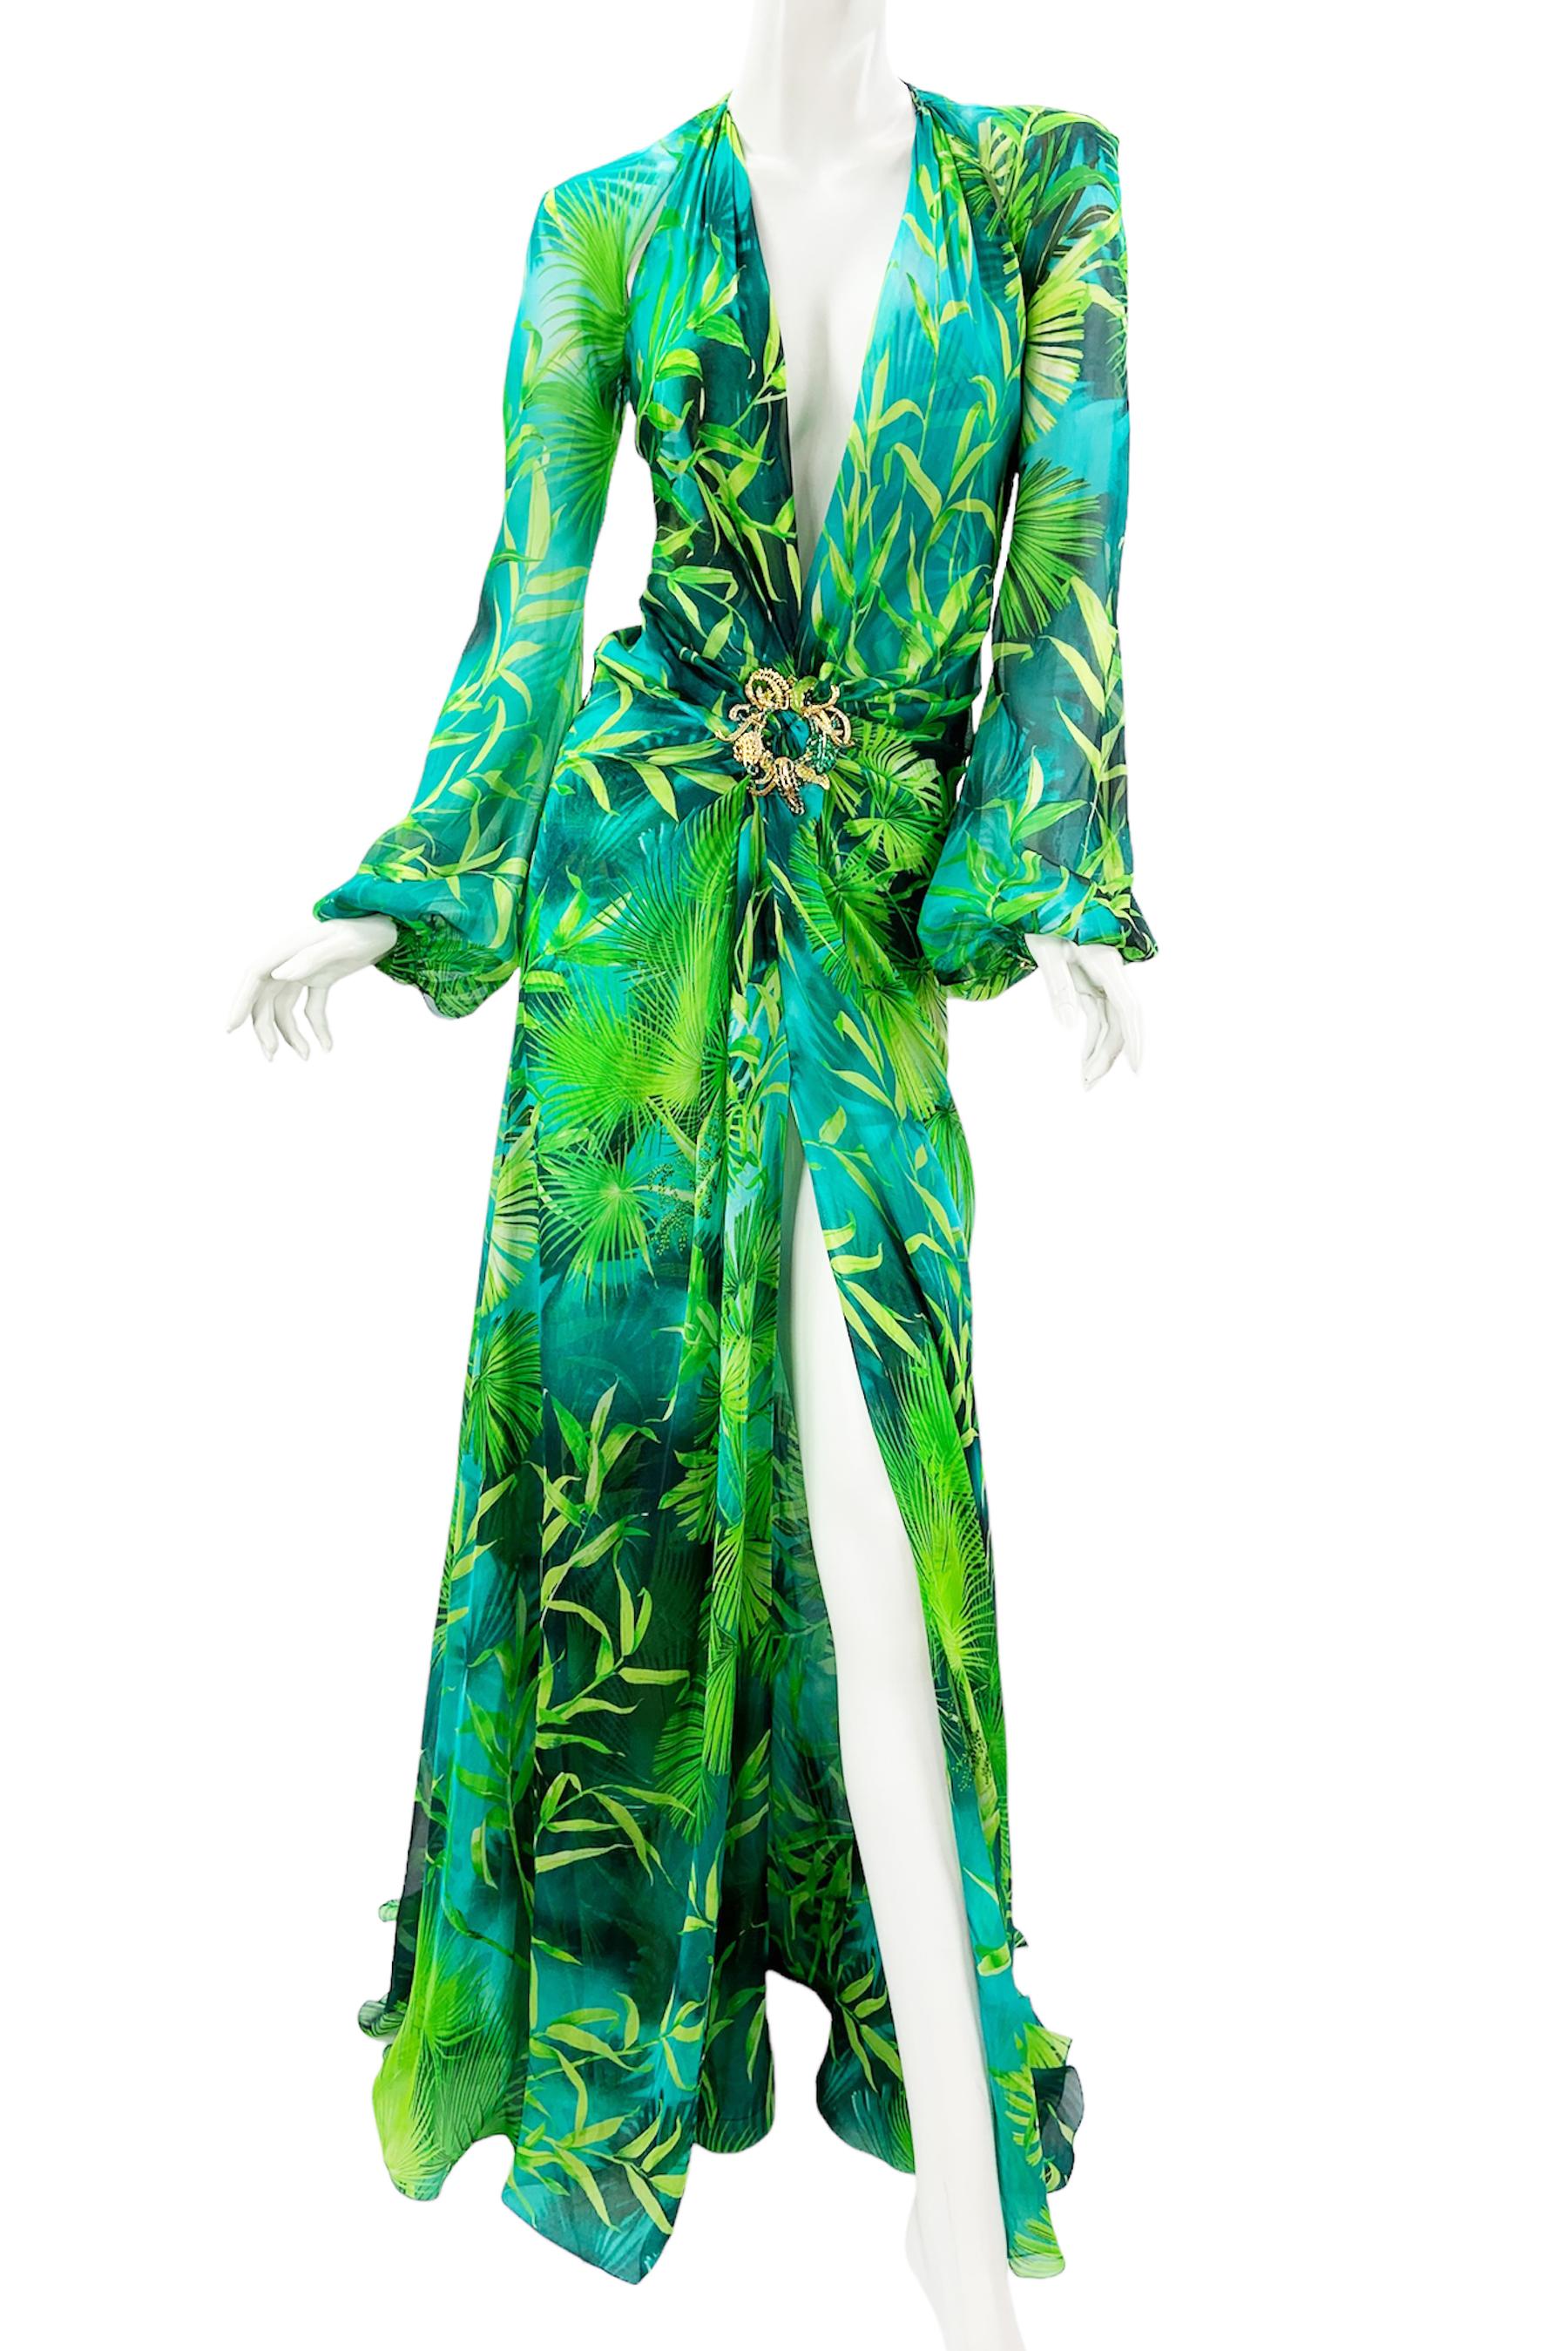 New Versace Iconic Jungle Print Silk Maxi Dress
S/S 2020 Collection
Italian size - 38
Versace Jungle print silk maxi dress is expertly crafted in Italy and features a plunging V-neck, shoulder slashes, long balloon sleeves, gold tone Medusa buttons,